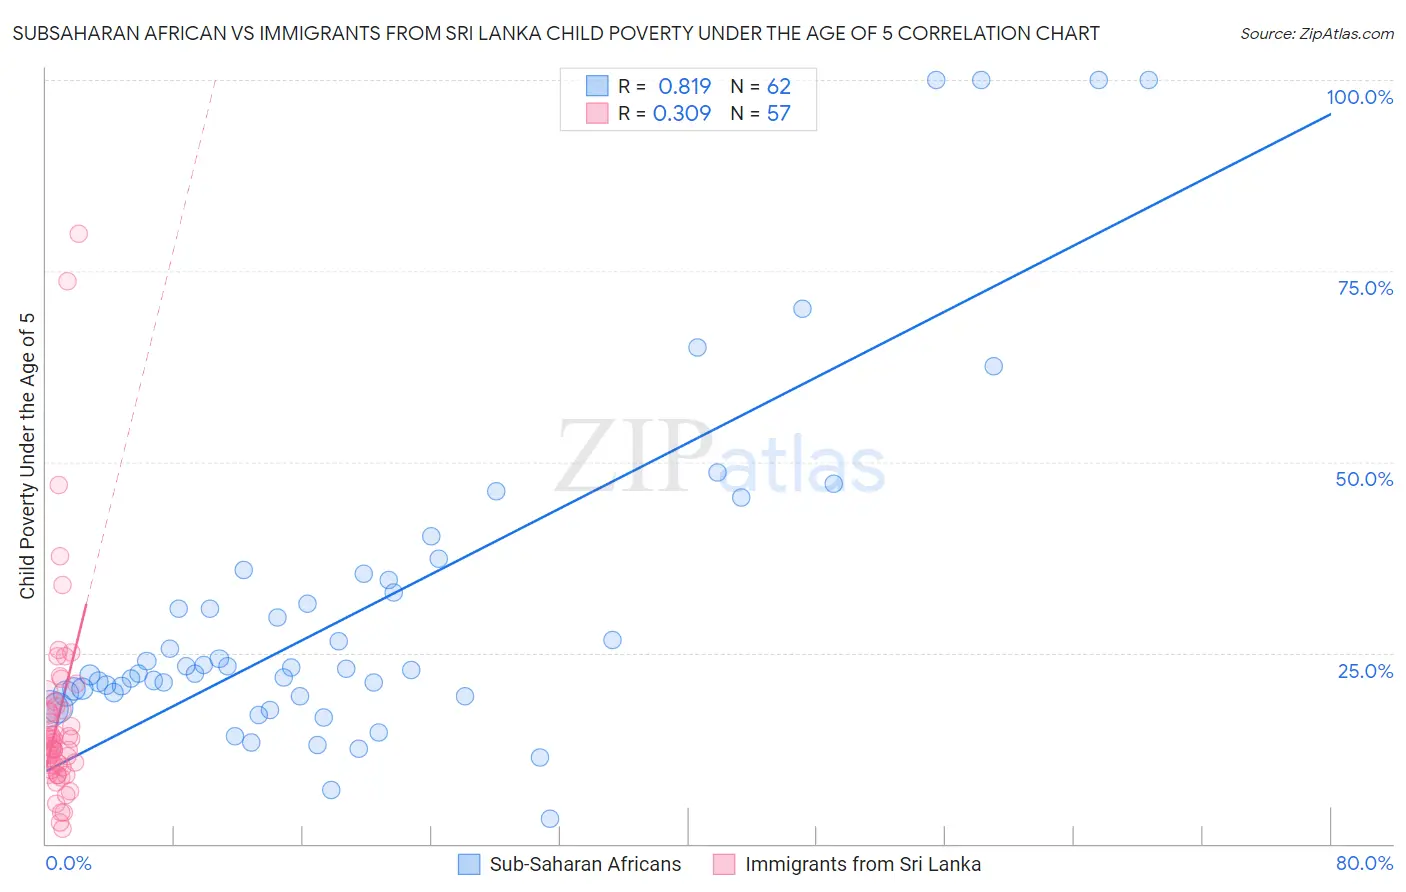 Subsaharan African vs Immigrants from Sri Lanka Child Poverty Under the Age of 5